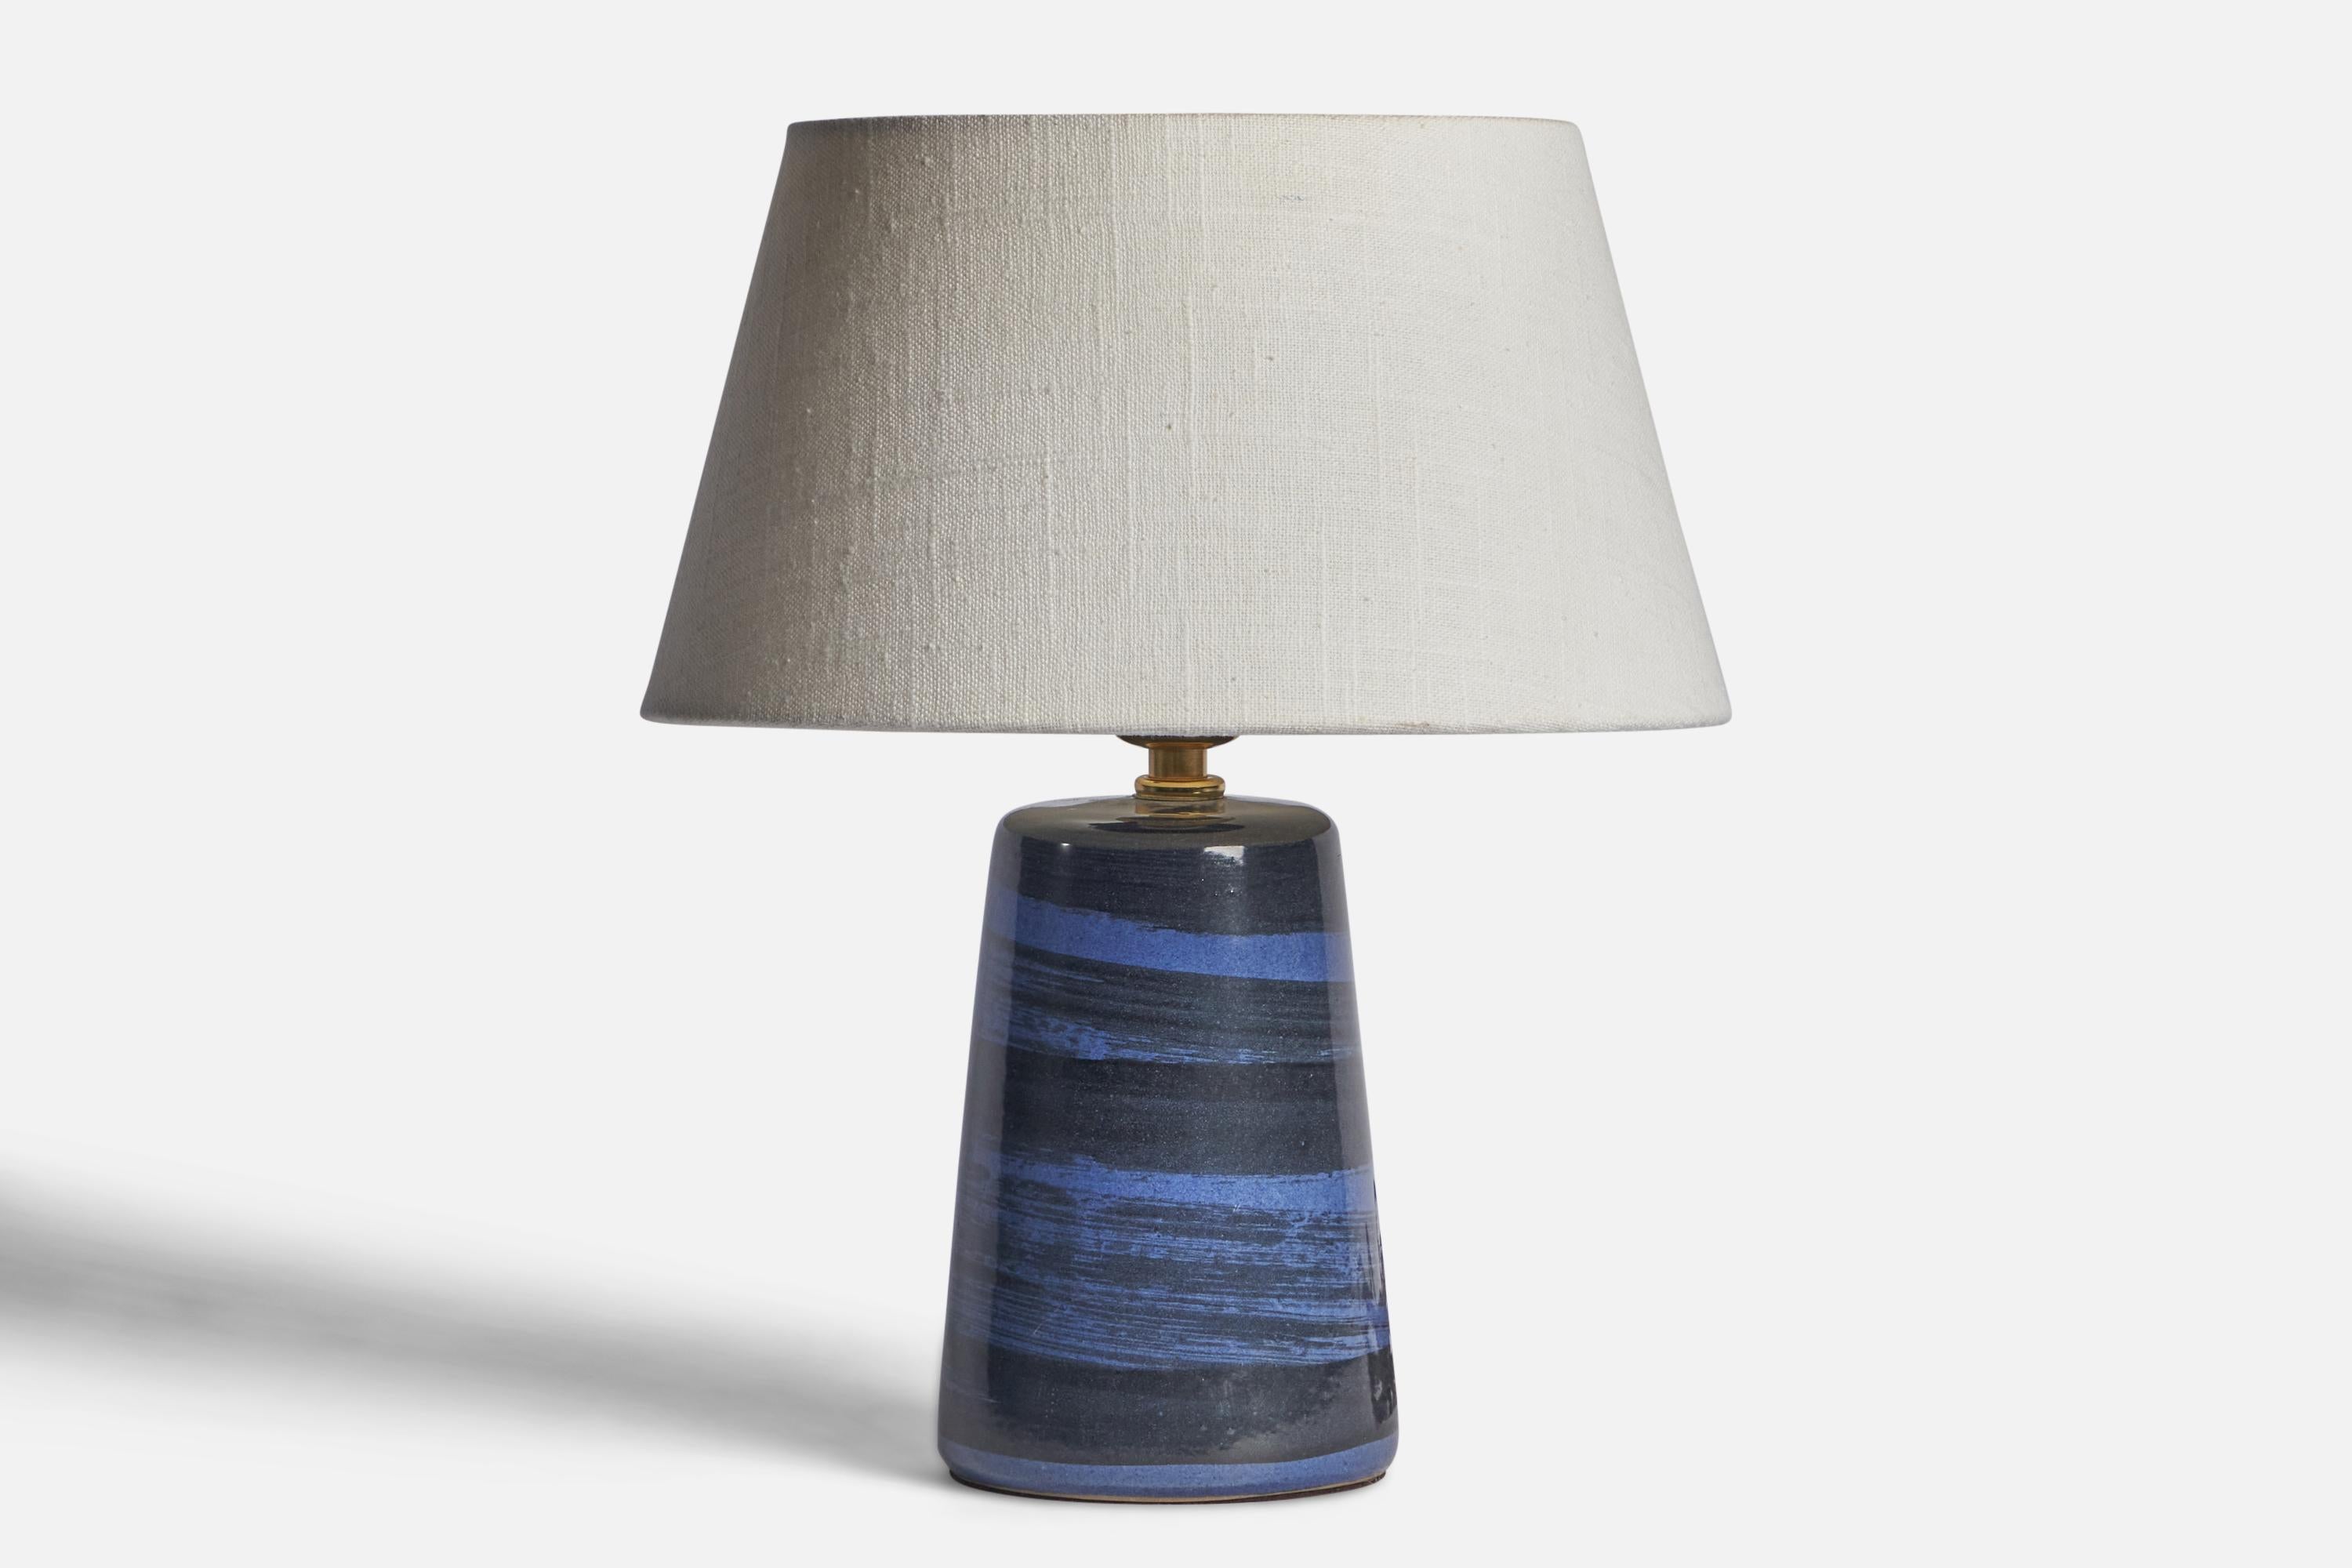 A blue-glazed ceramic and table lamp designed by Jane & Gordon Martz and produced by Marshall Studios, USA, 1960s.

Dimensions of Lamp (inches): 9.15” H x 4.3” Diameter
Dimensions of Shade (inches): 7” Top Diameter x 10” Bottom Diameter x